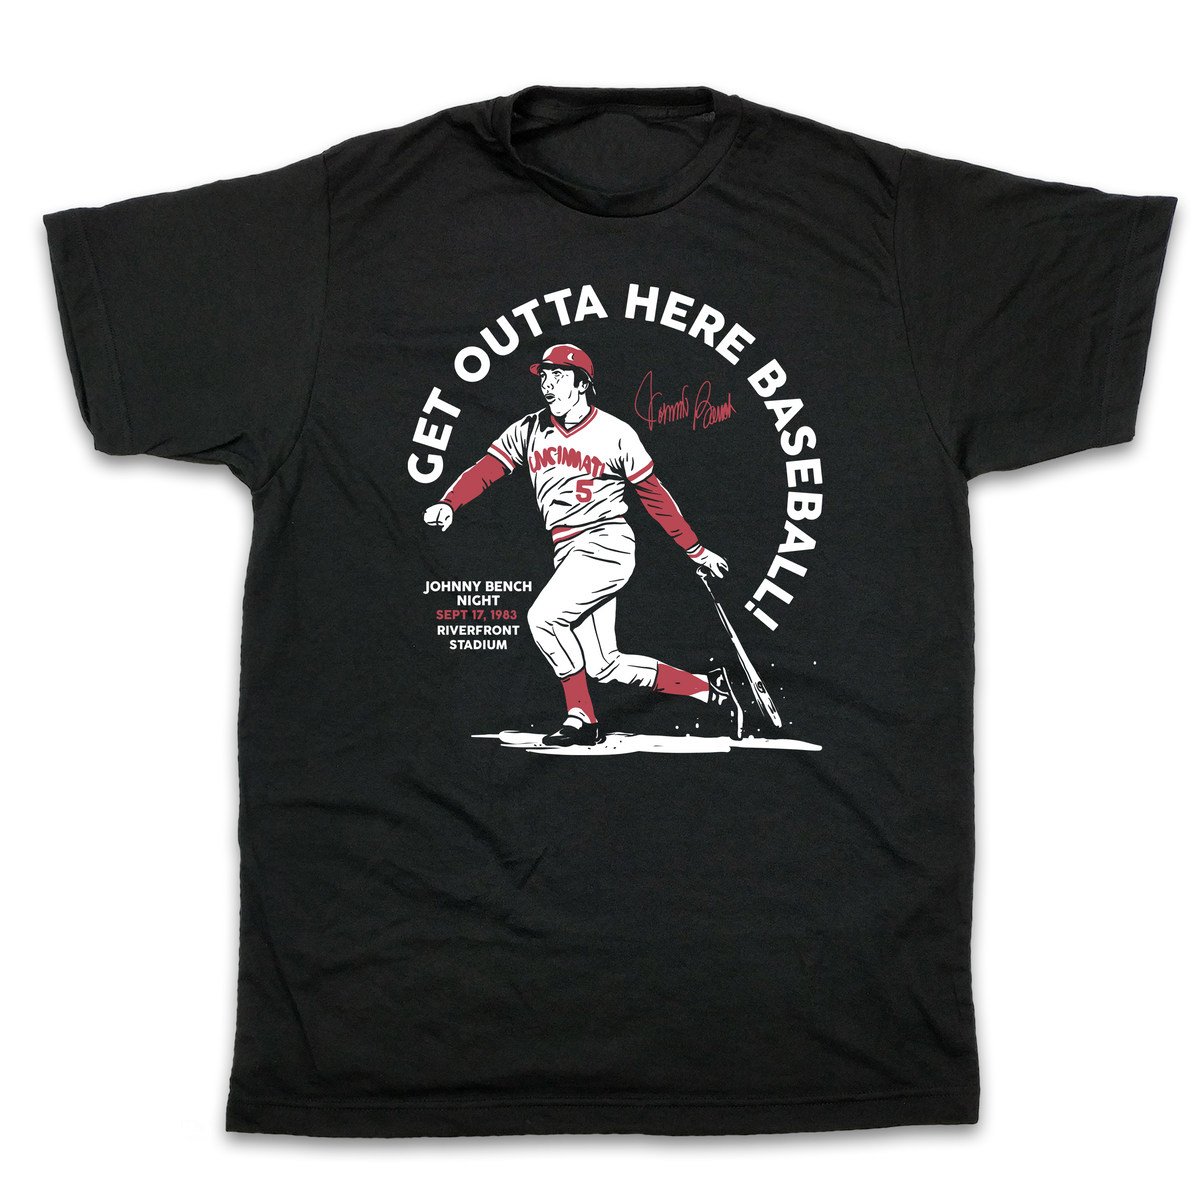 Get Outta Here Baseball Johnny Bench - In The Clutch